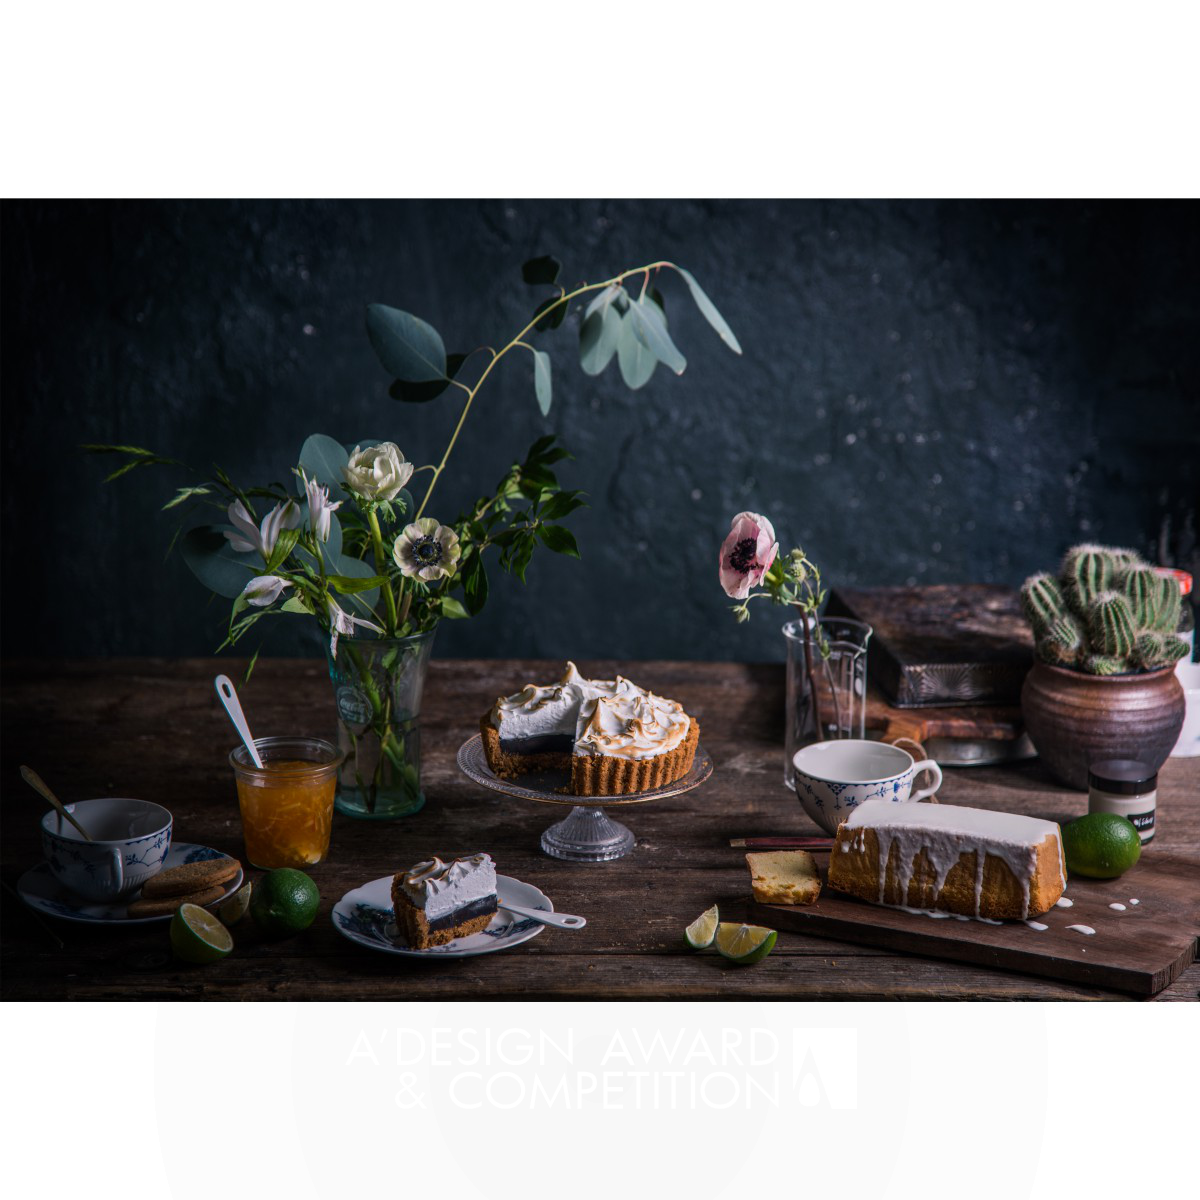 VINTAGE TABLE SETTING PHOTOGRAPHY